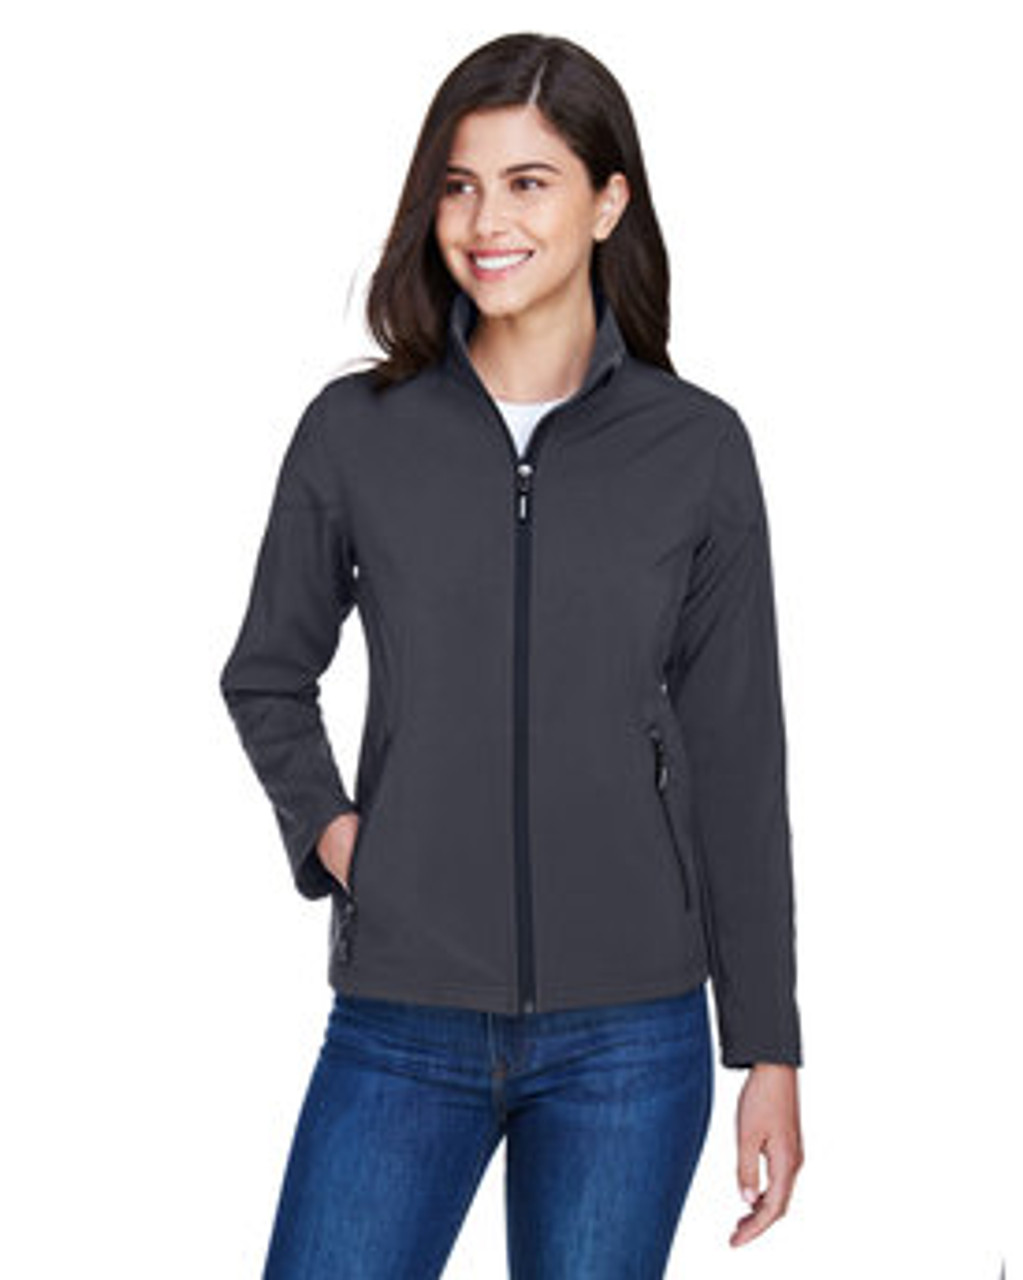 Core 365 Ladies' Cruise Two-Layer Fleece Bonded SoftShell Jacket 78184 Carbon